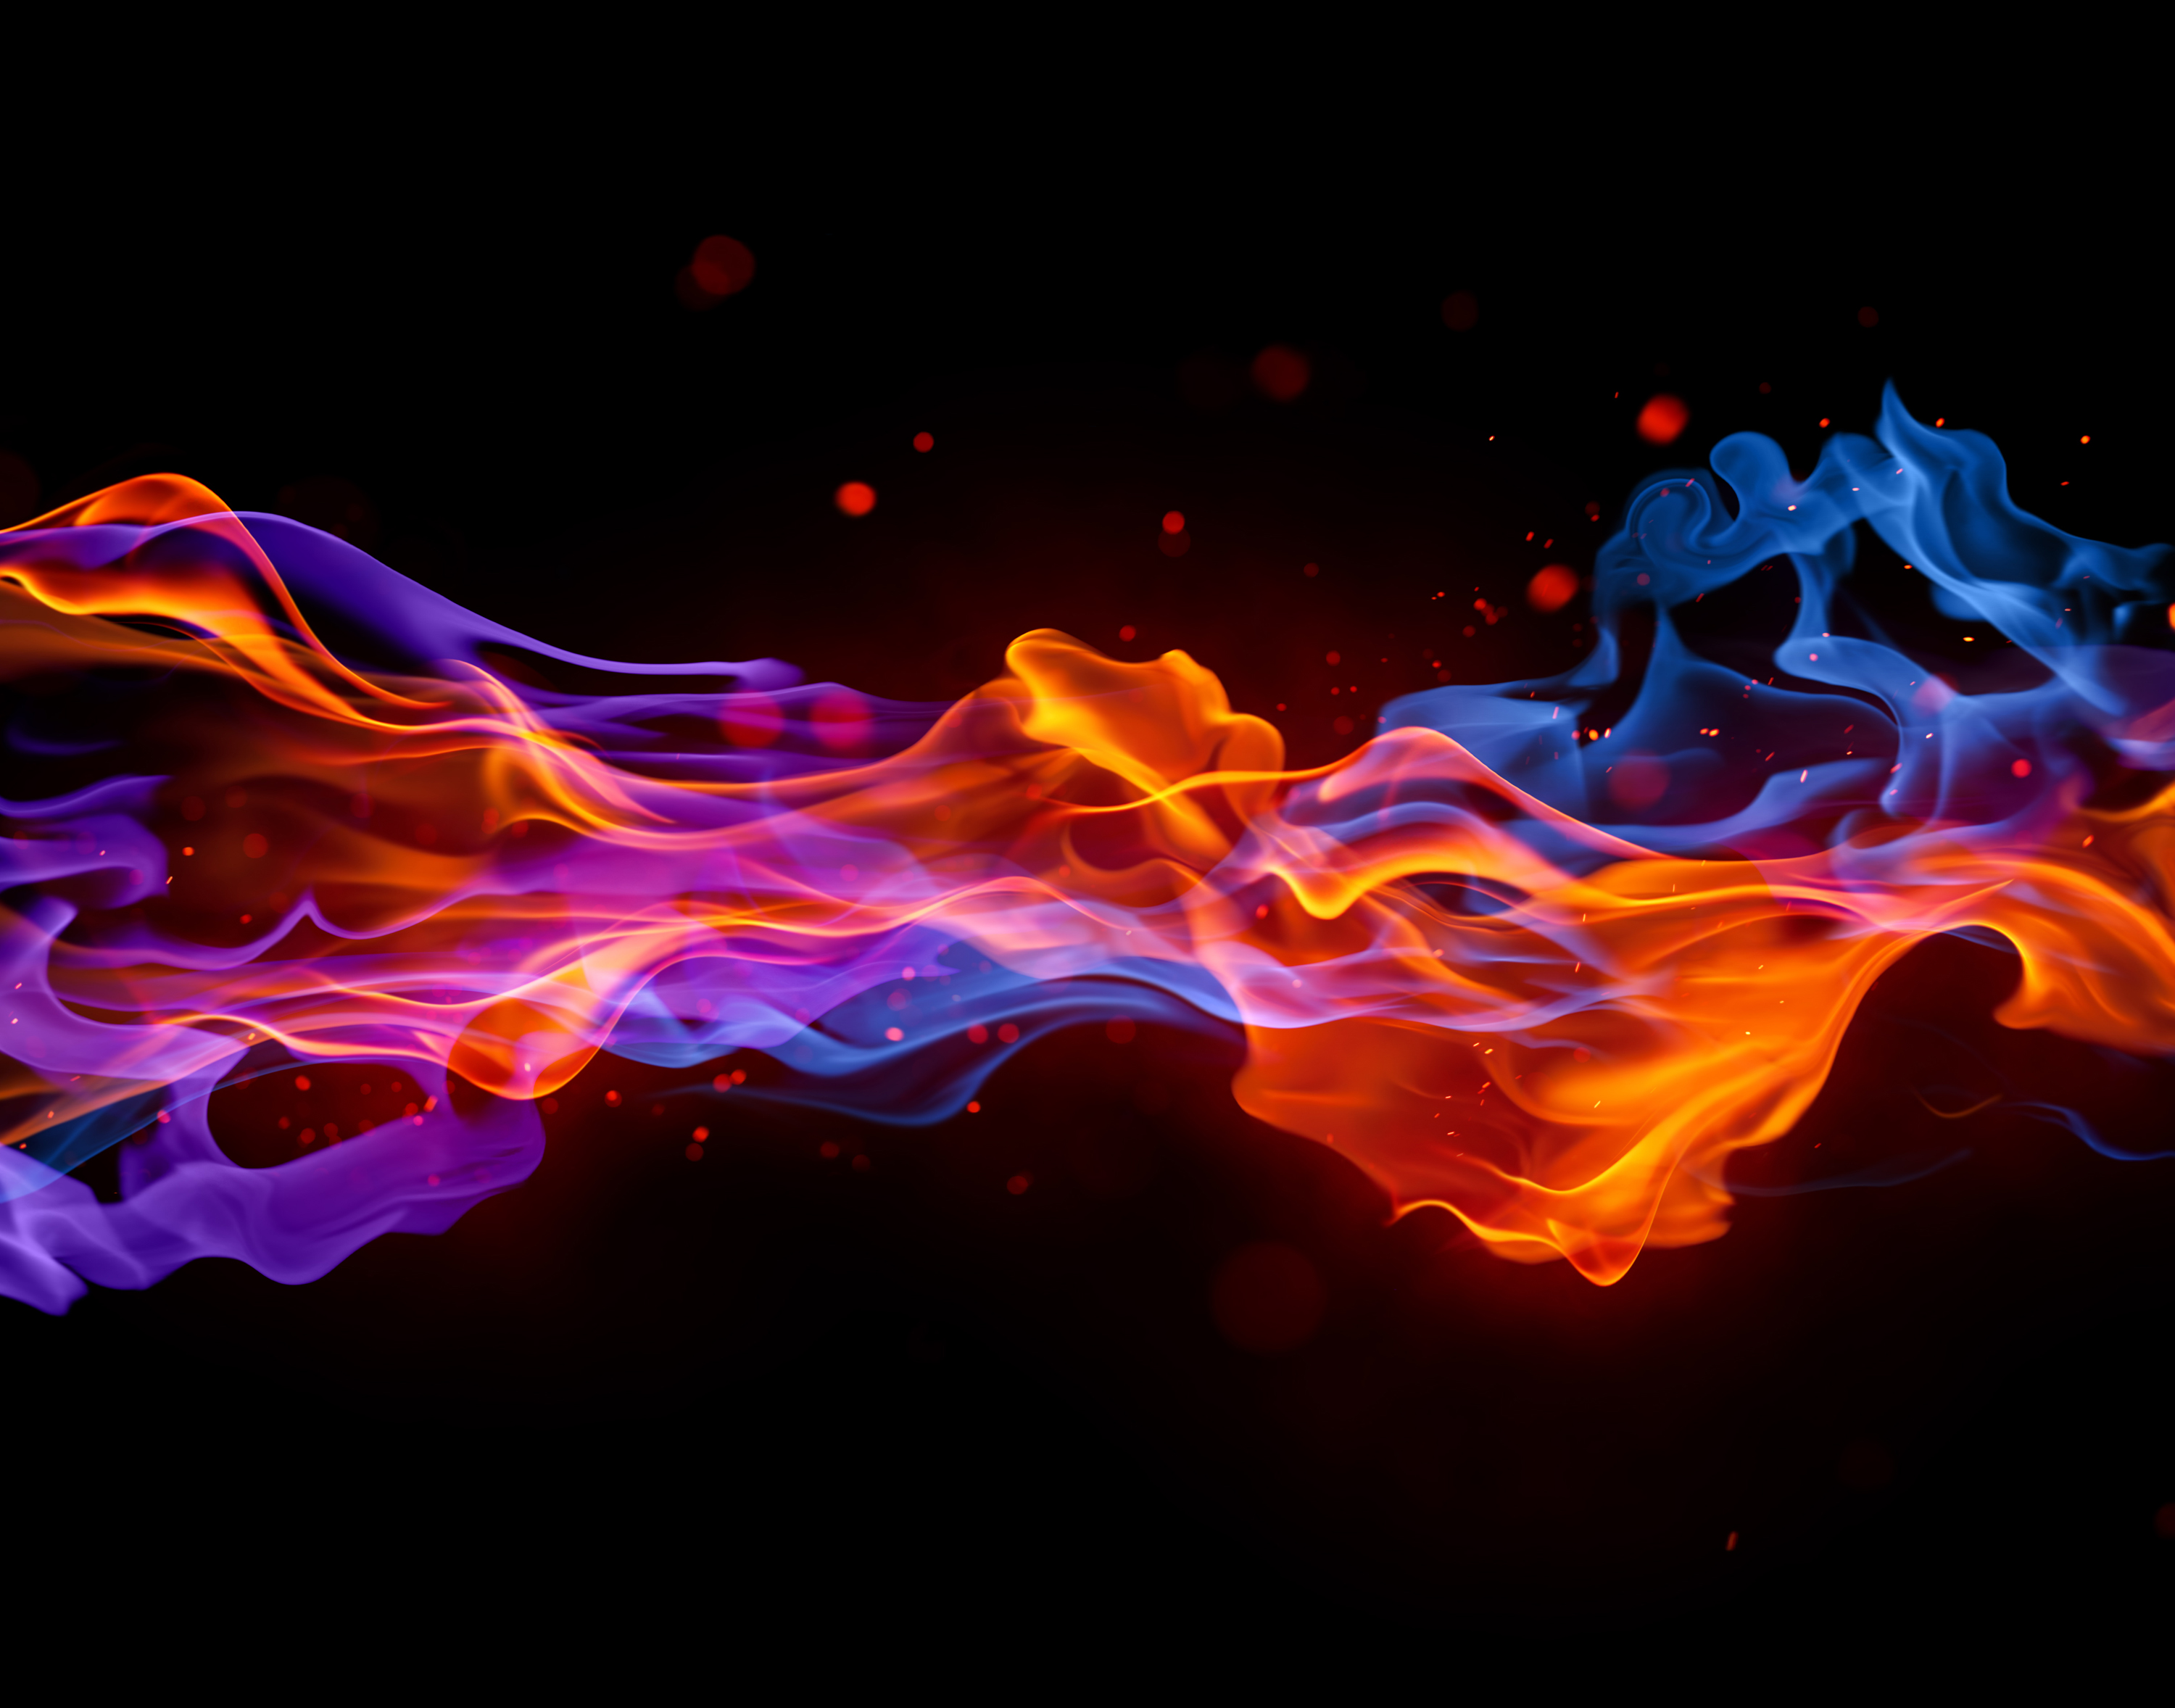 Red And Blue Fire Background Images Pictures   Becuo 3000x2356